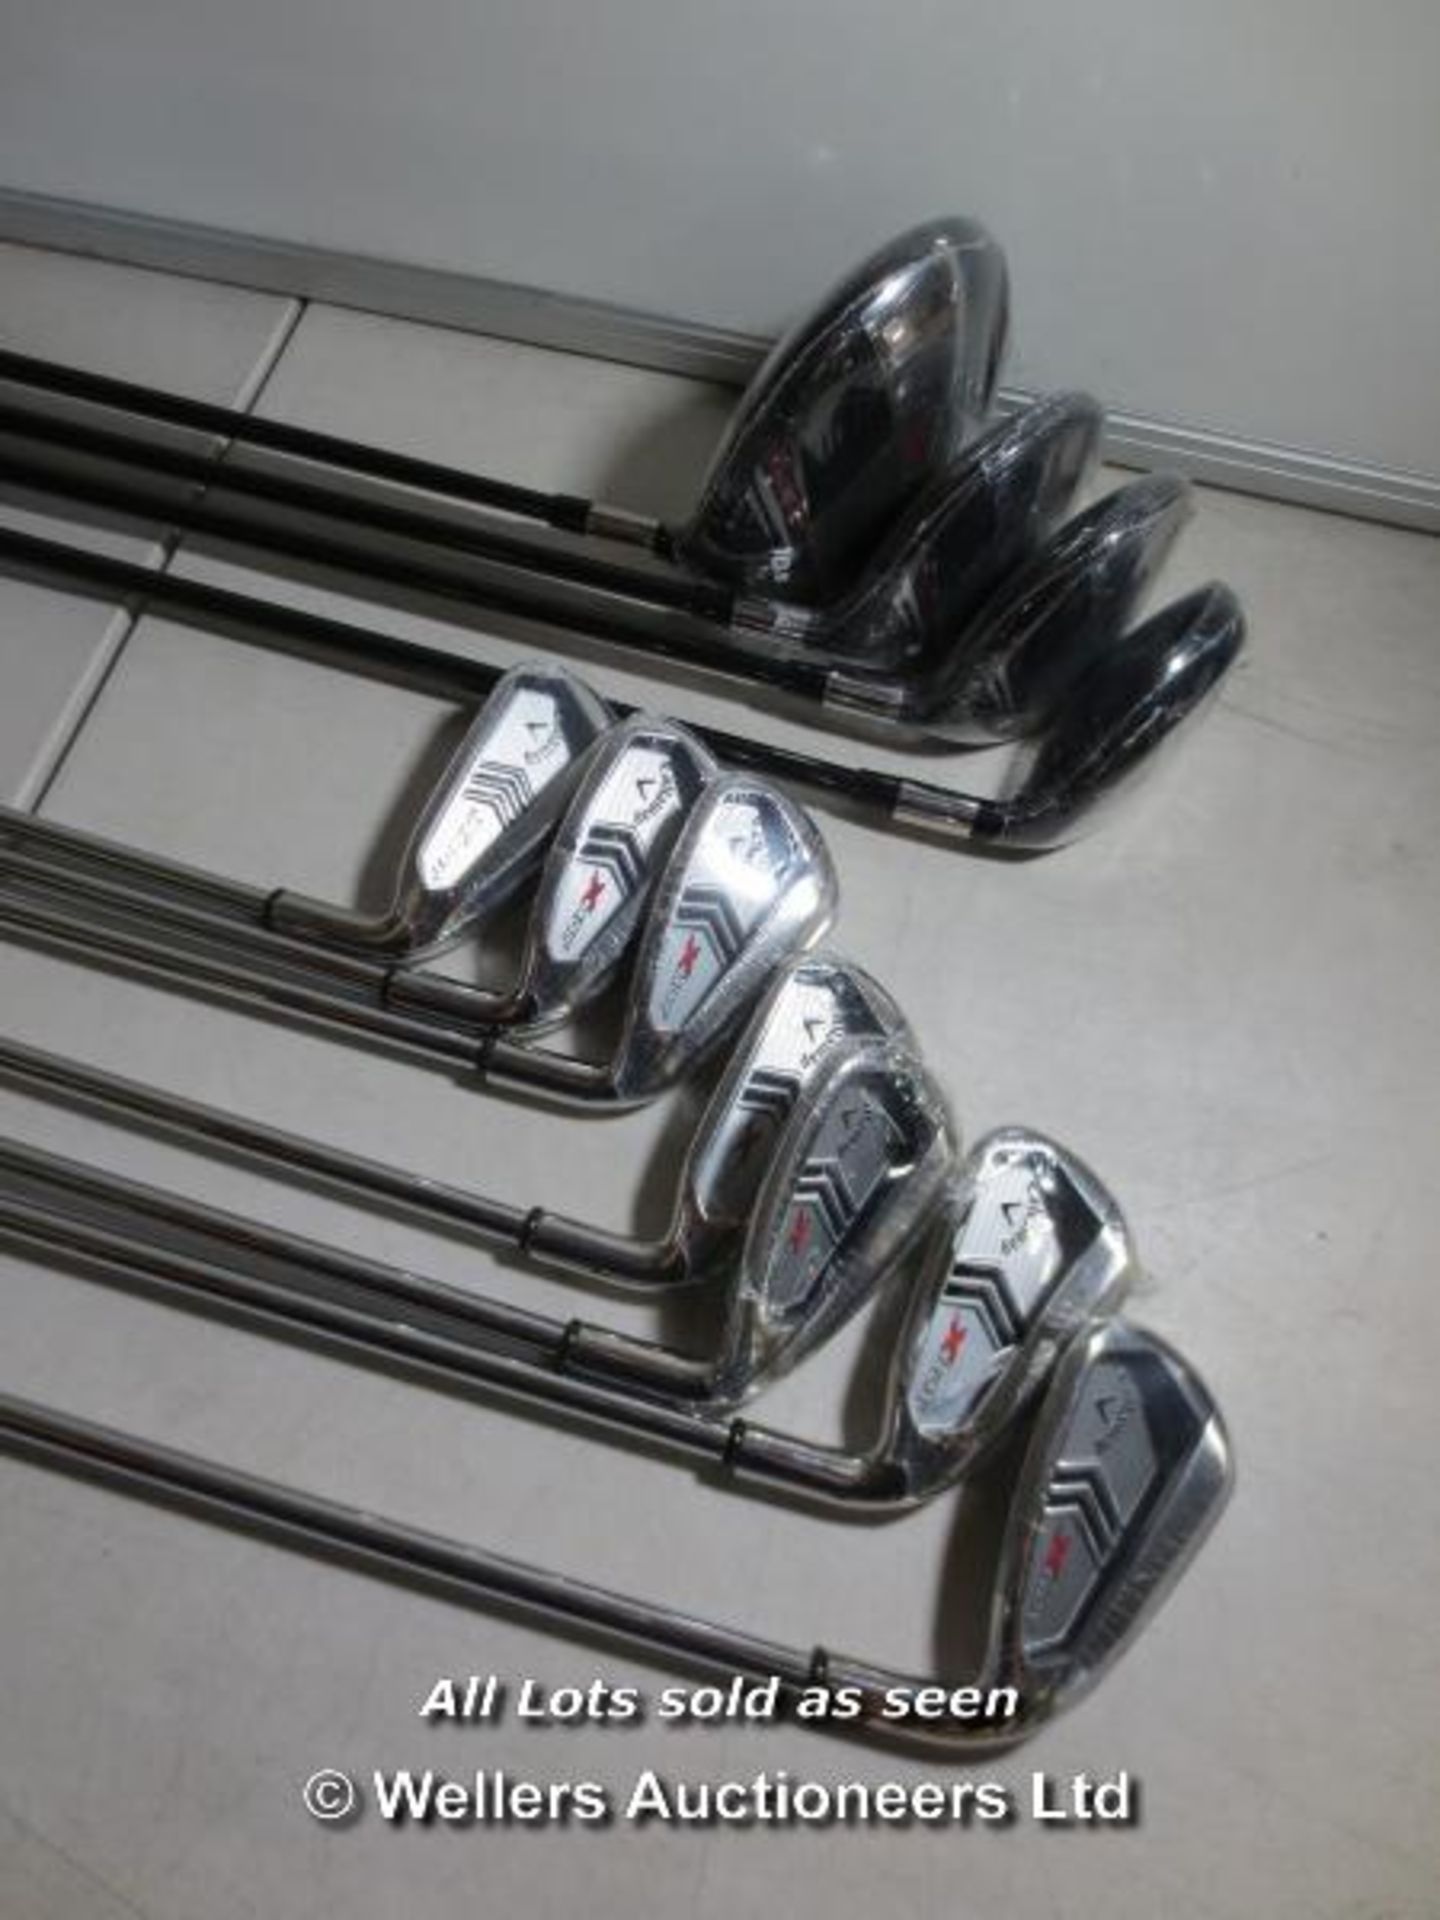 CALLAWAY X-HOT GOLF CLUB SET (11X CLUBS) (CLUB BLADE ARE STILL POLY WRAPPED) EX.DISPLAY / GRADE: - Image 2 of 2